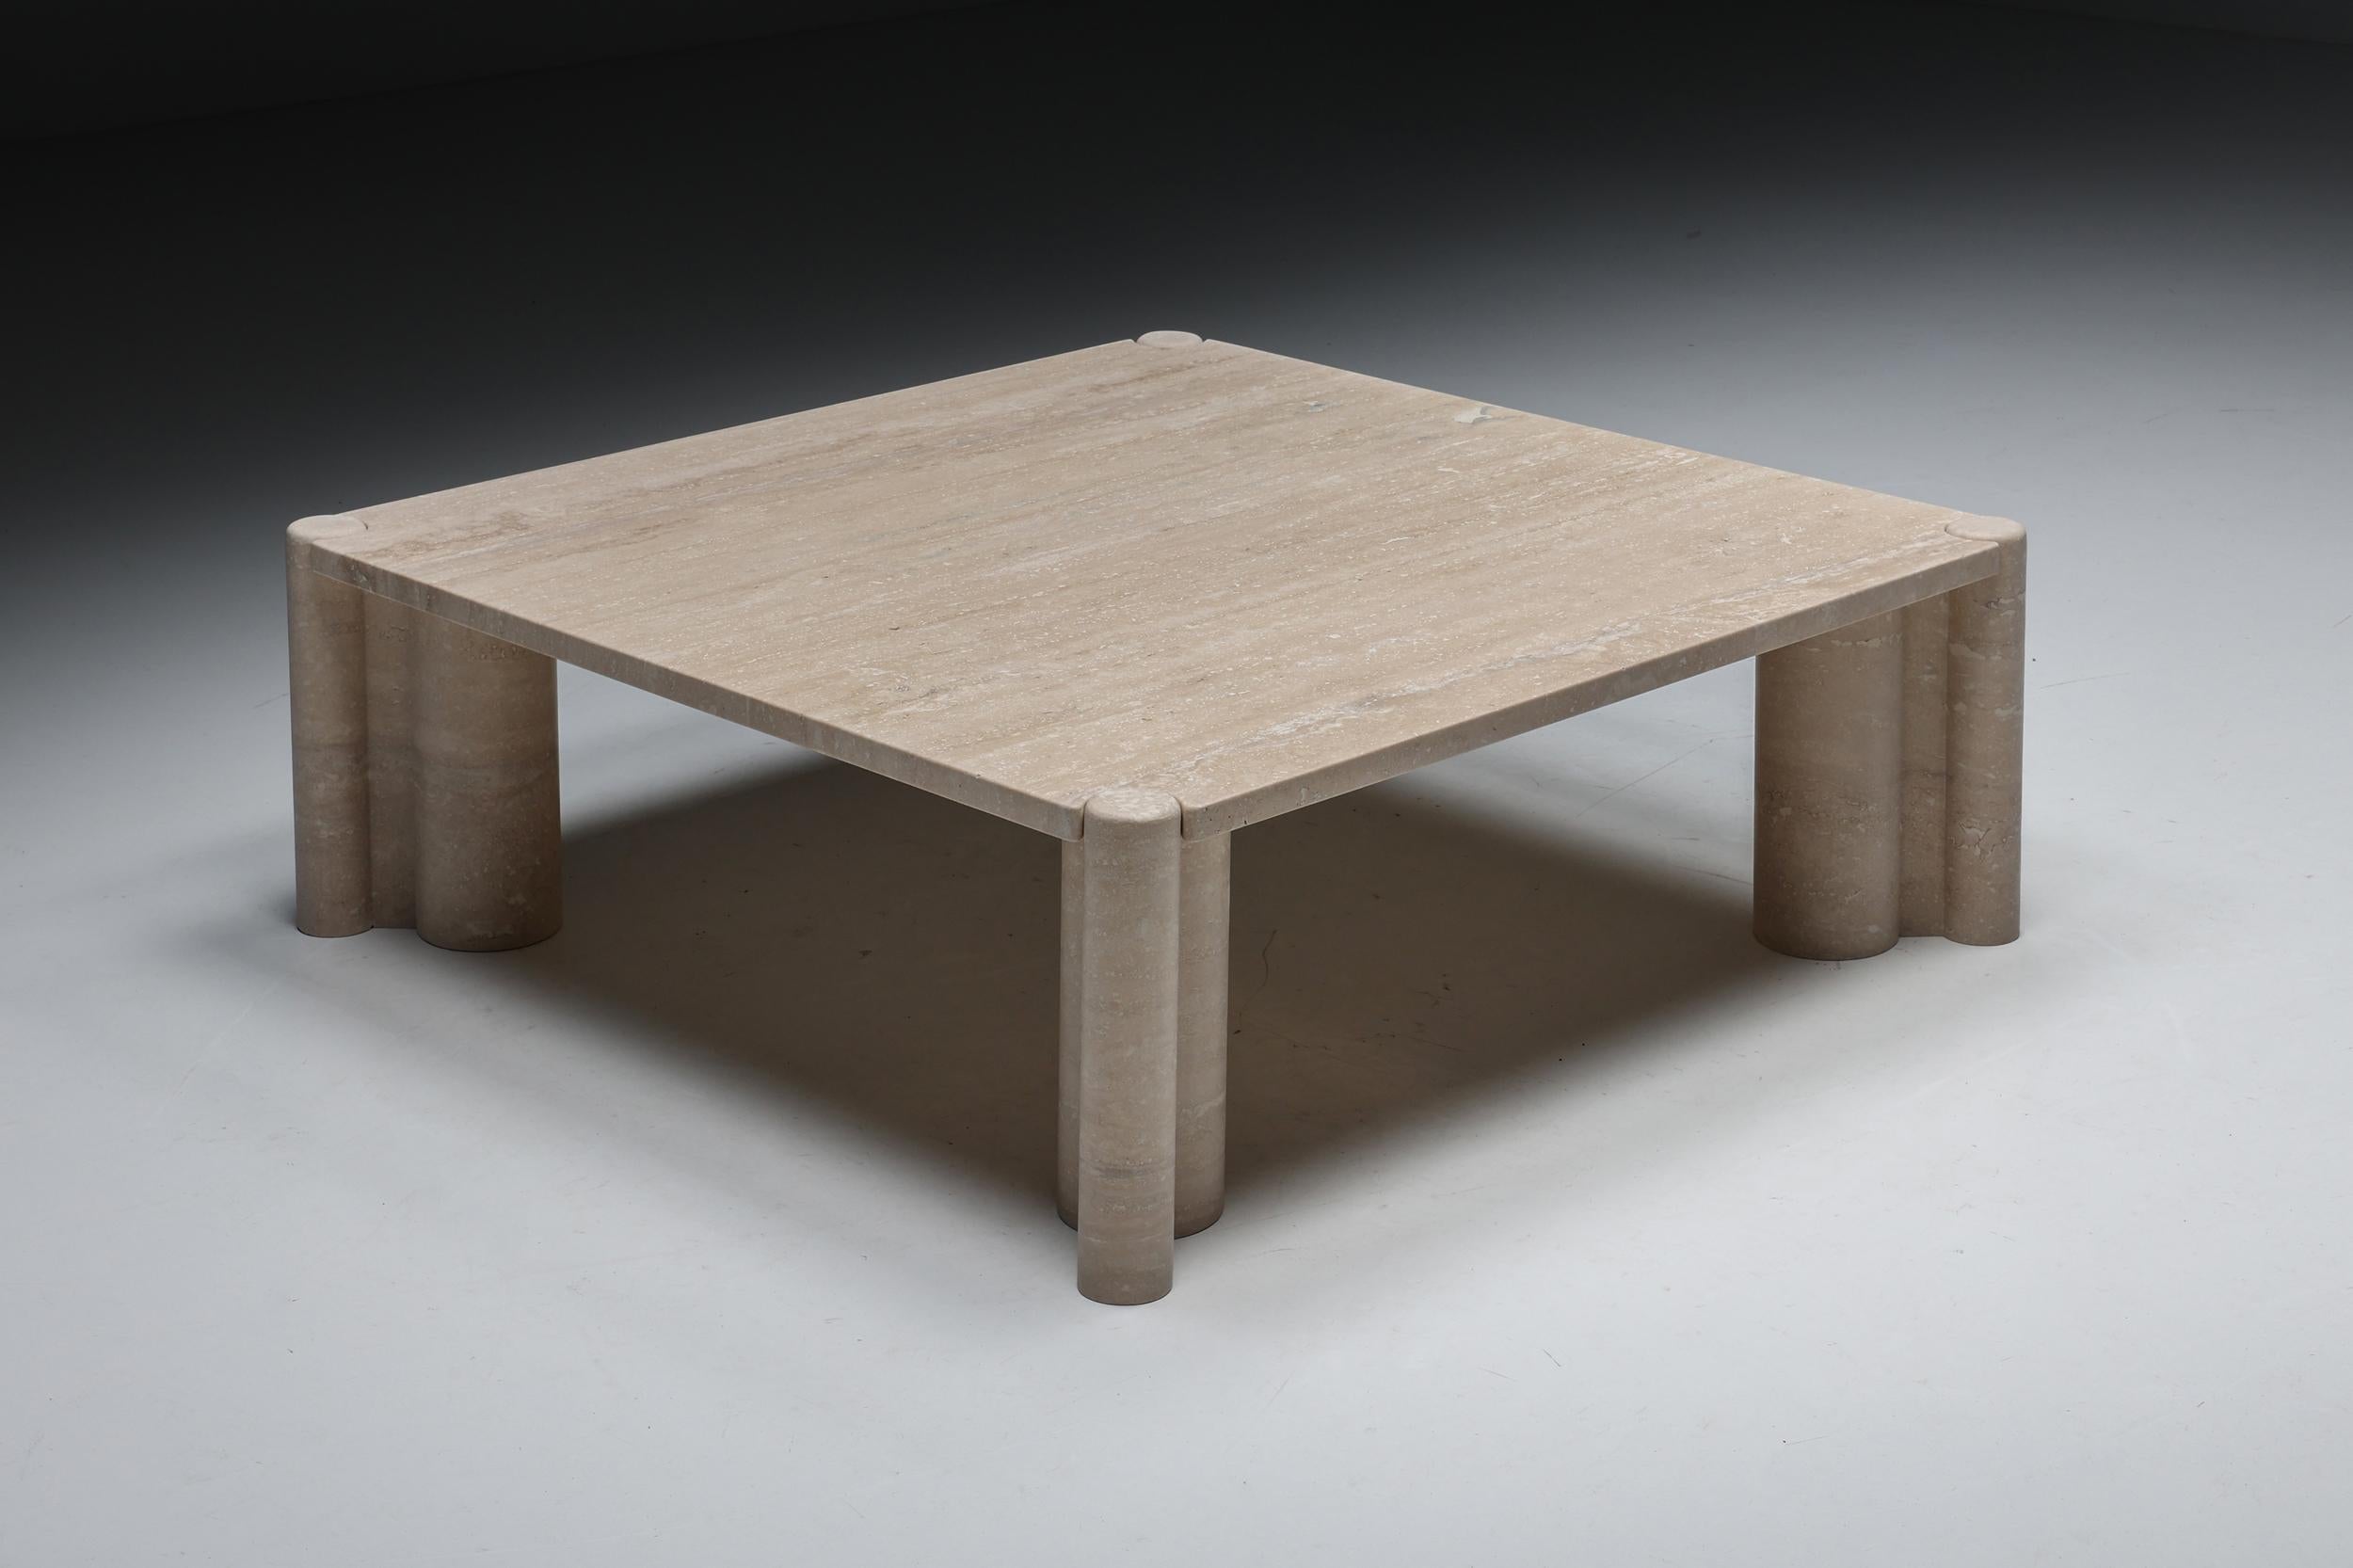 Gae Aulenti; Travertine; Marble; coffee table; cocktail table; side table; Mid-Century Modern; Italy; Italian Design; Postmodern; Jumbo; 1960s; 

Travertine “Jumbo” coffee table with column legs, designed by Gae Aulenti for Knoll in the 1960s. The